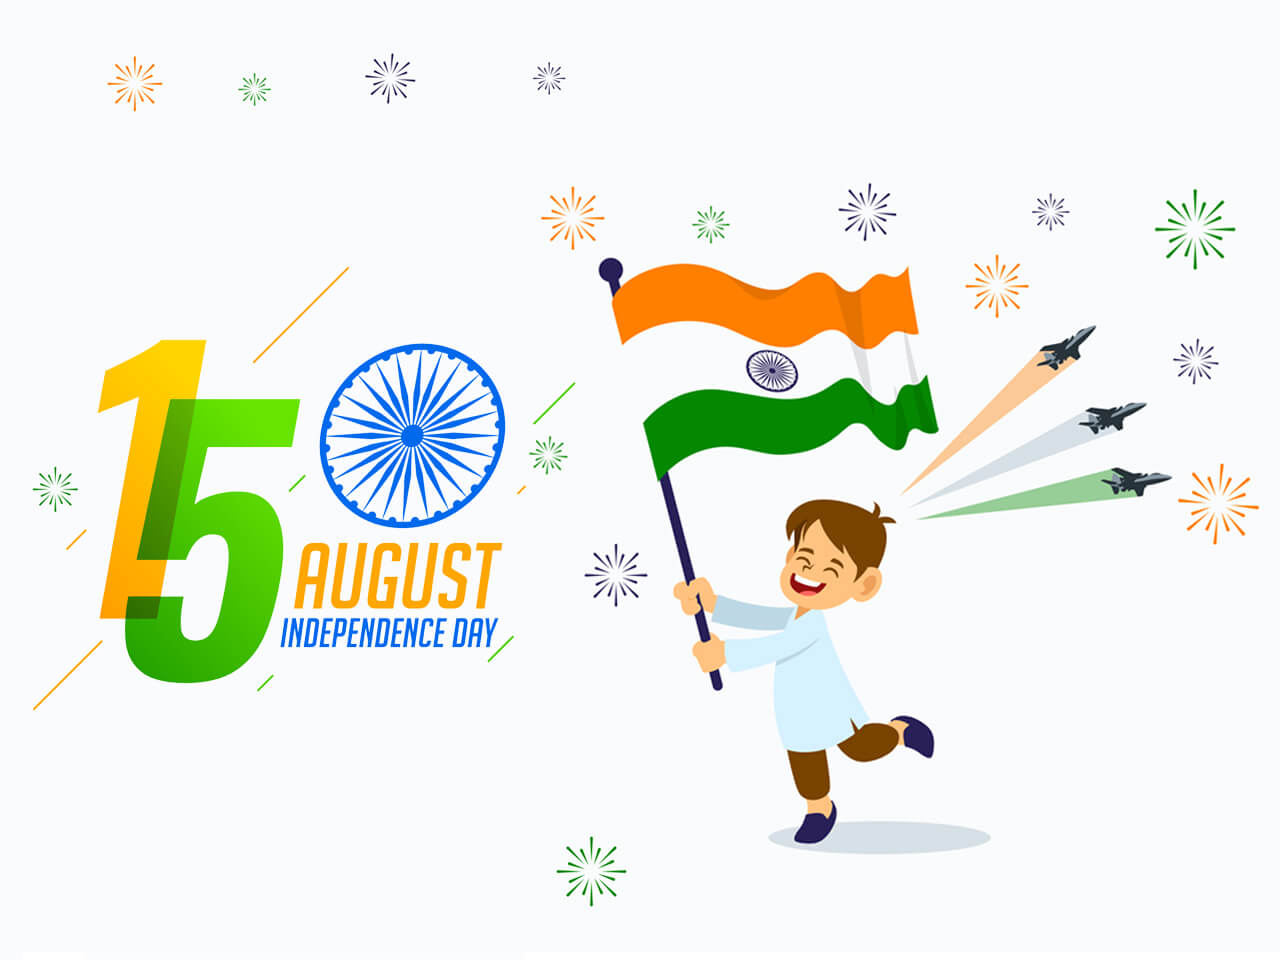 childrens Independence day image Download 